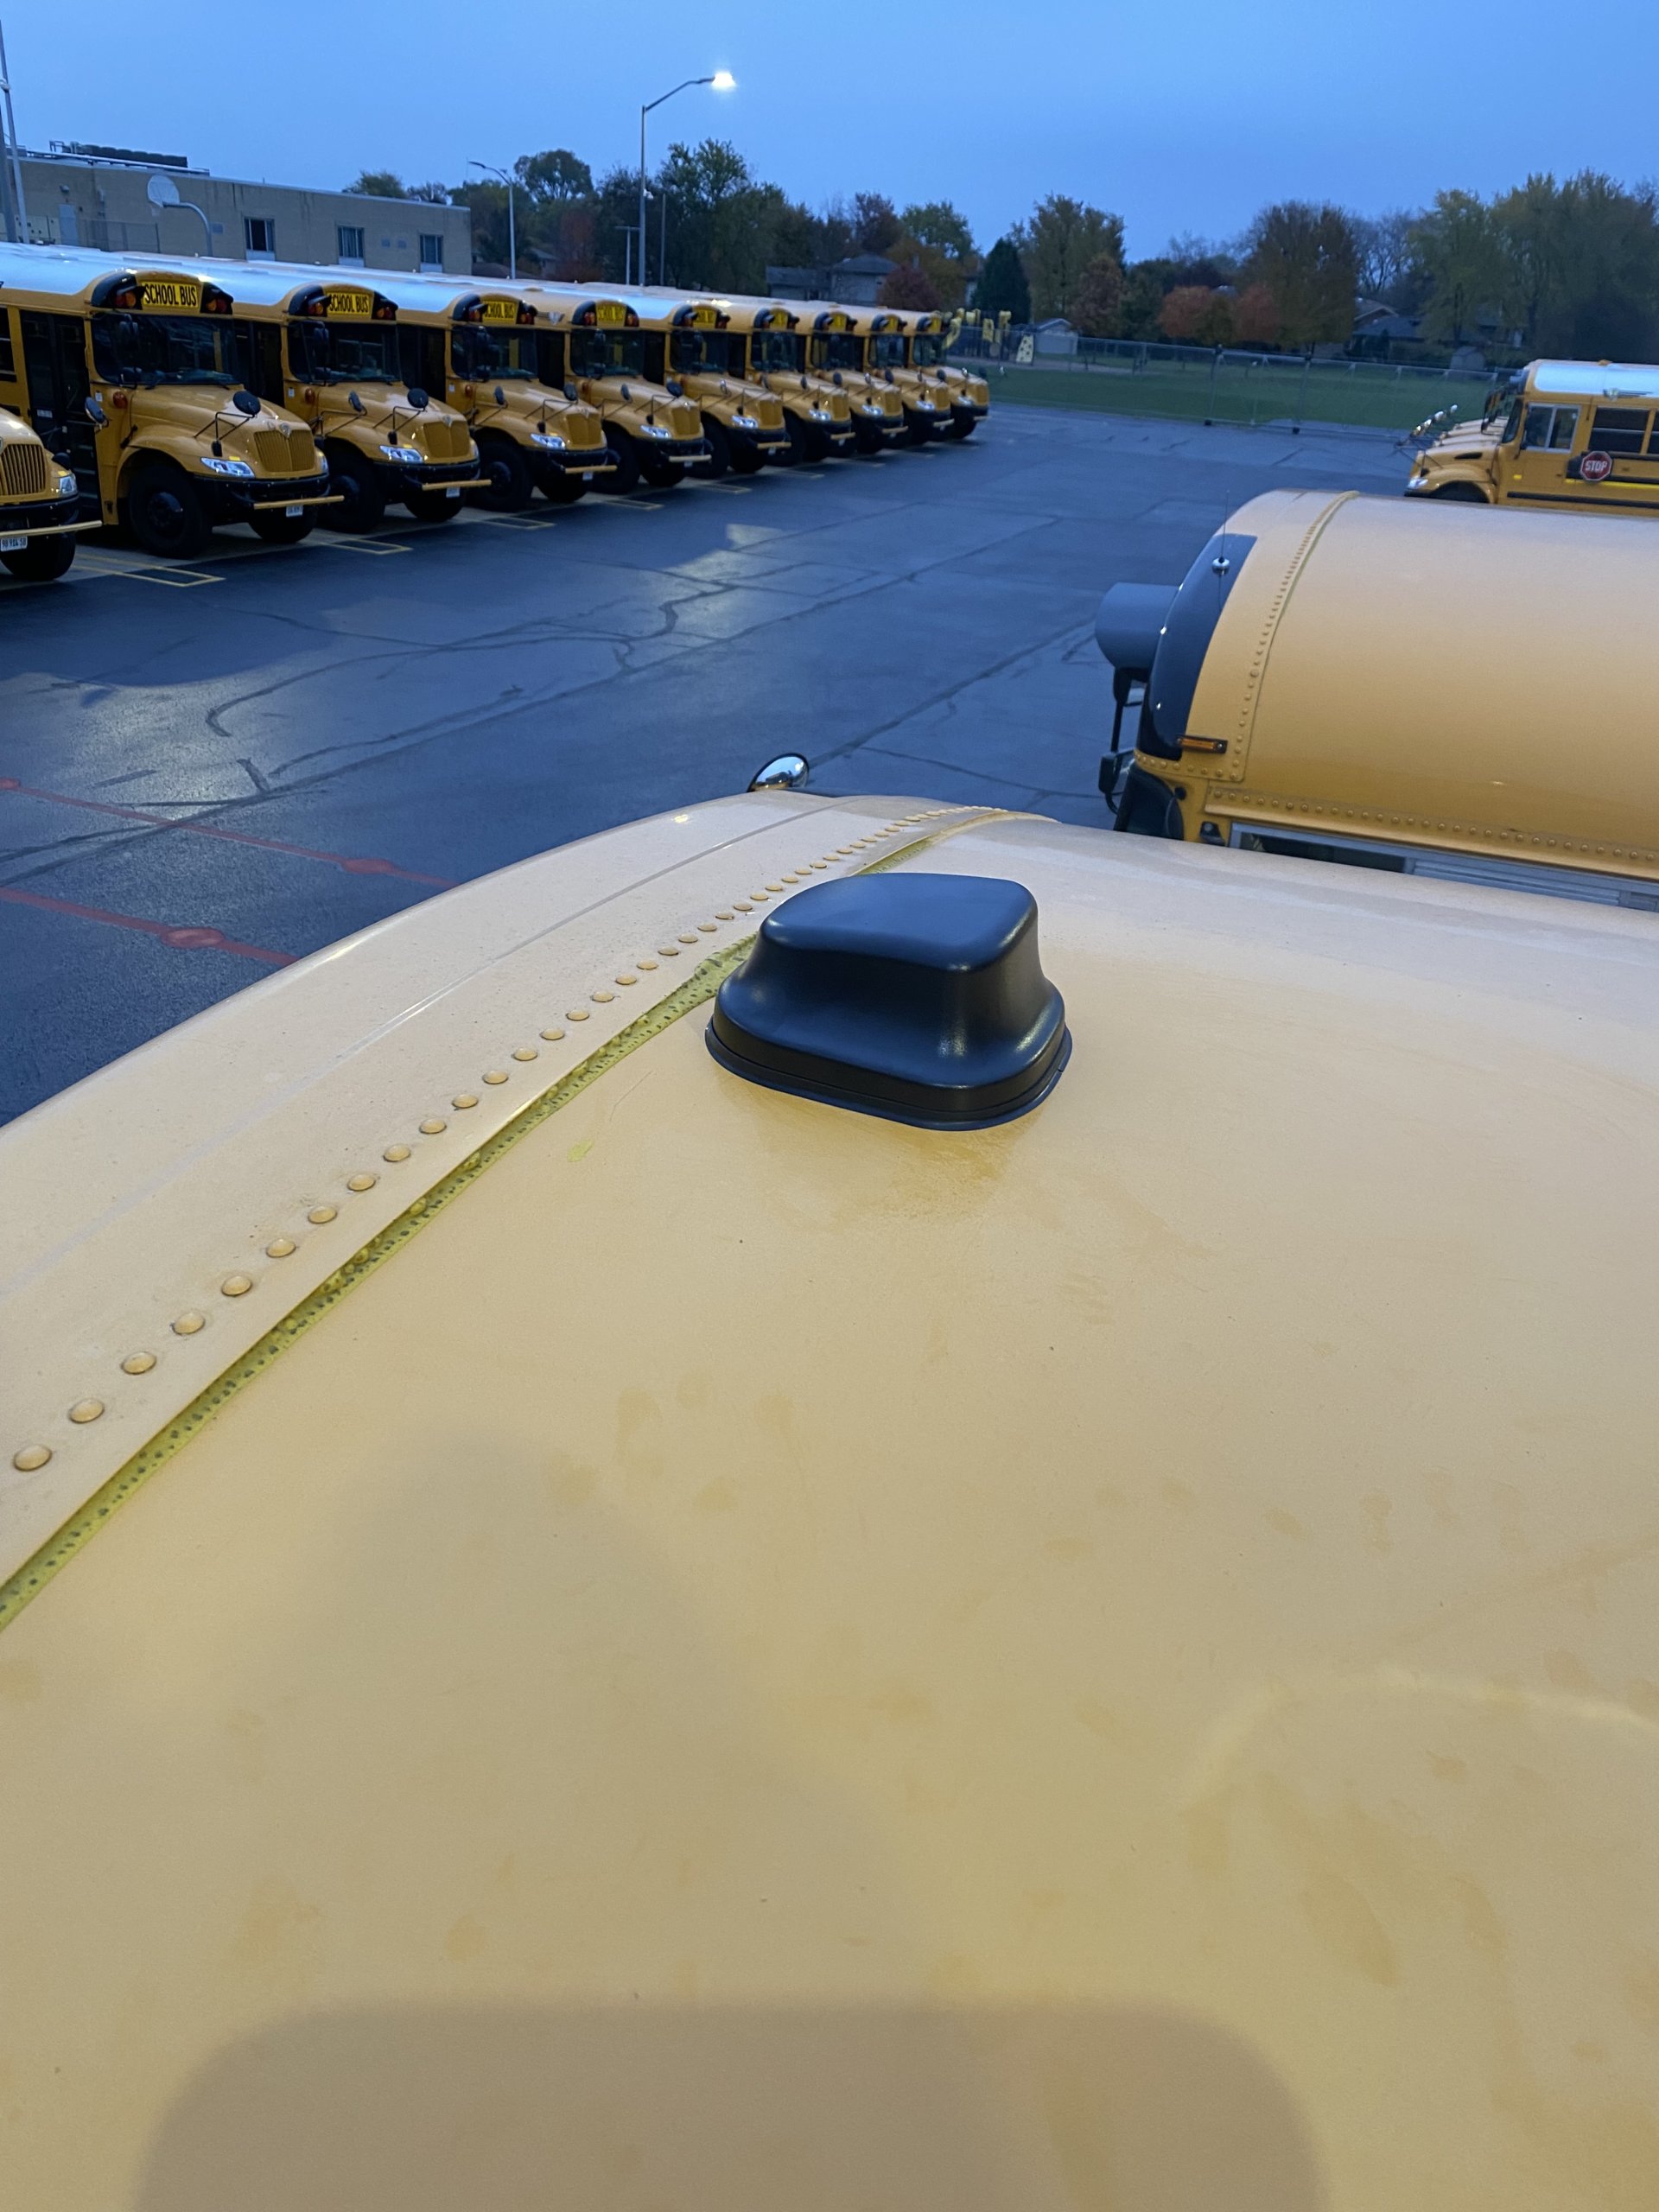 An antenna mounted on the roof of a school bus